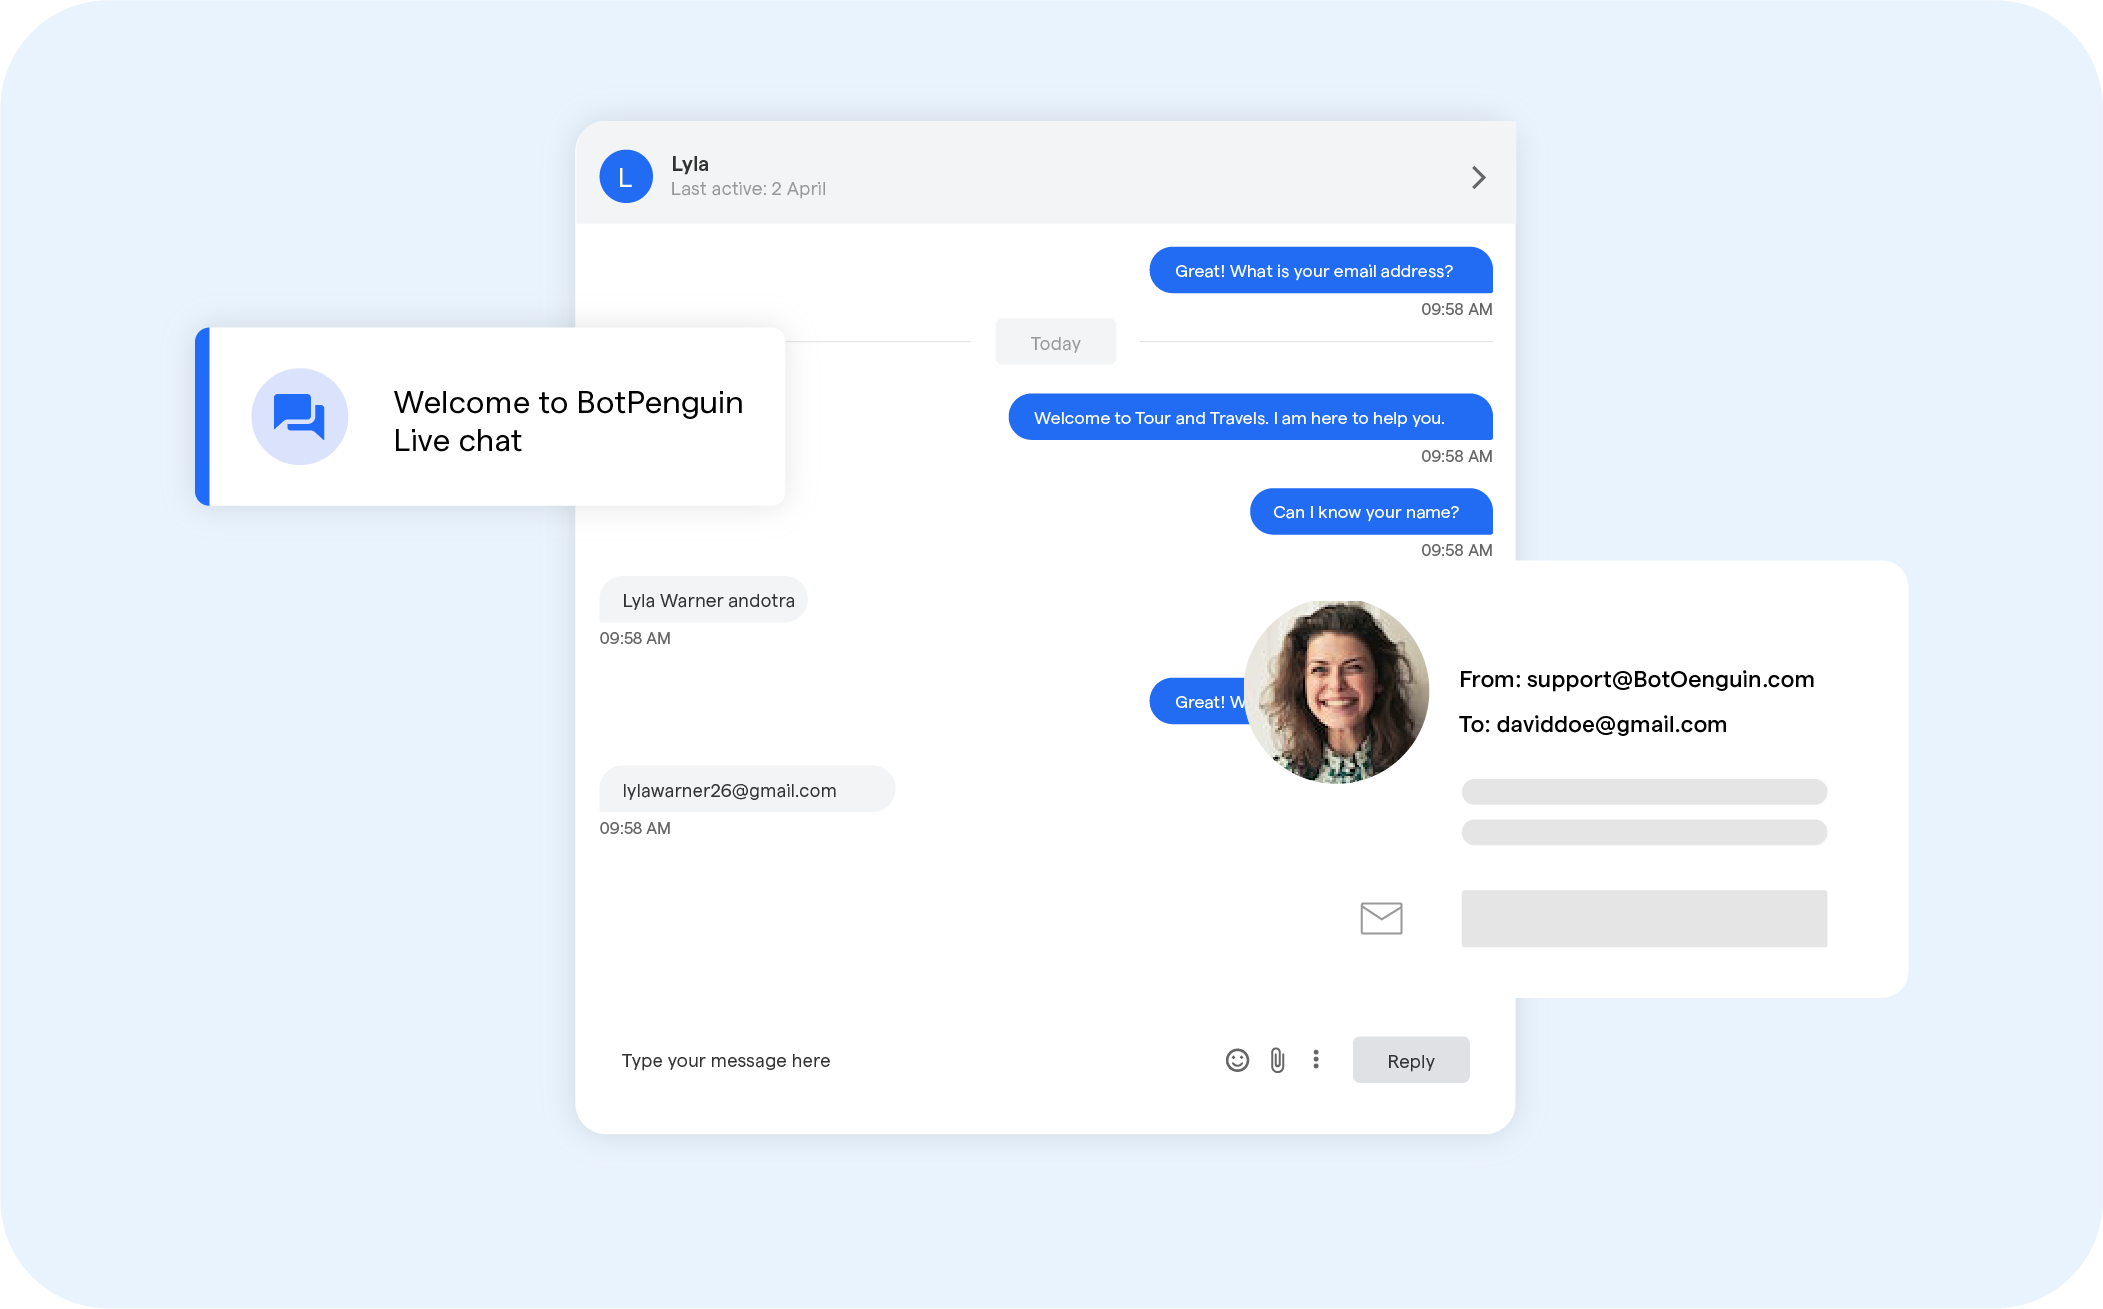 Developing the Chatbot's Features